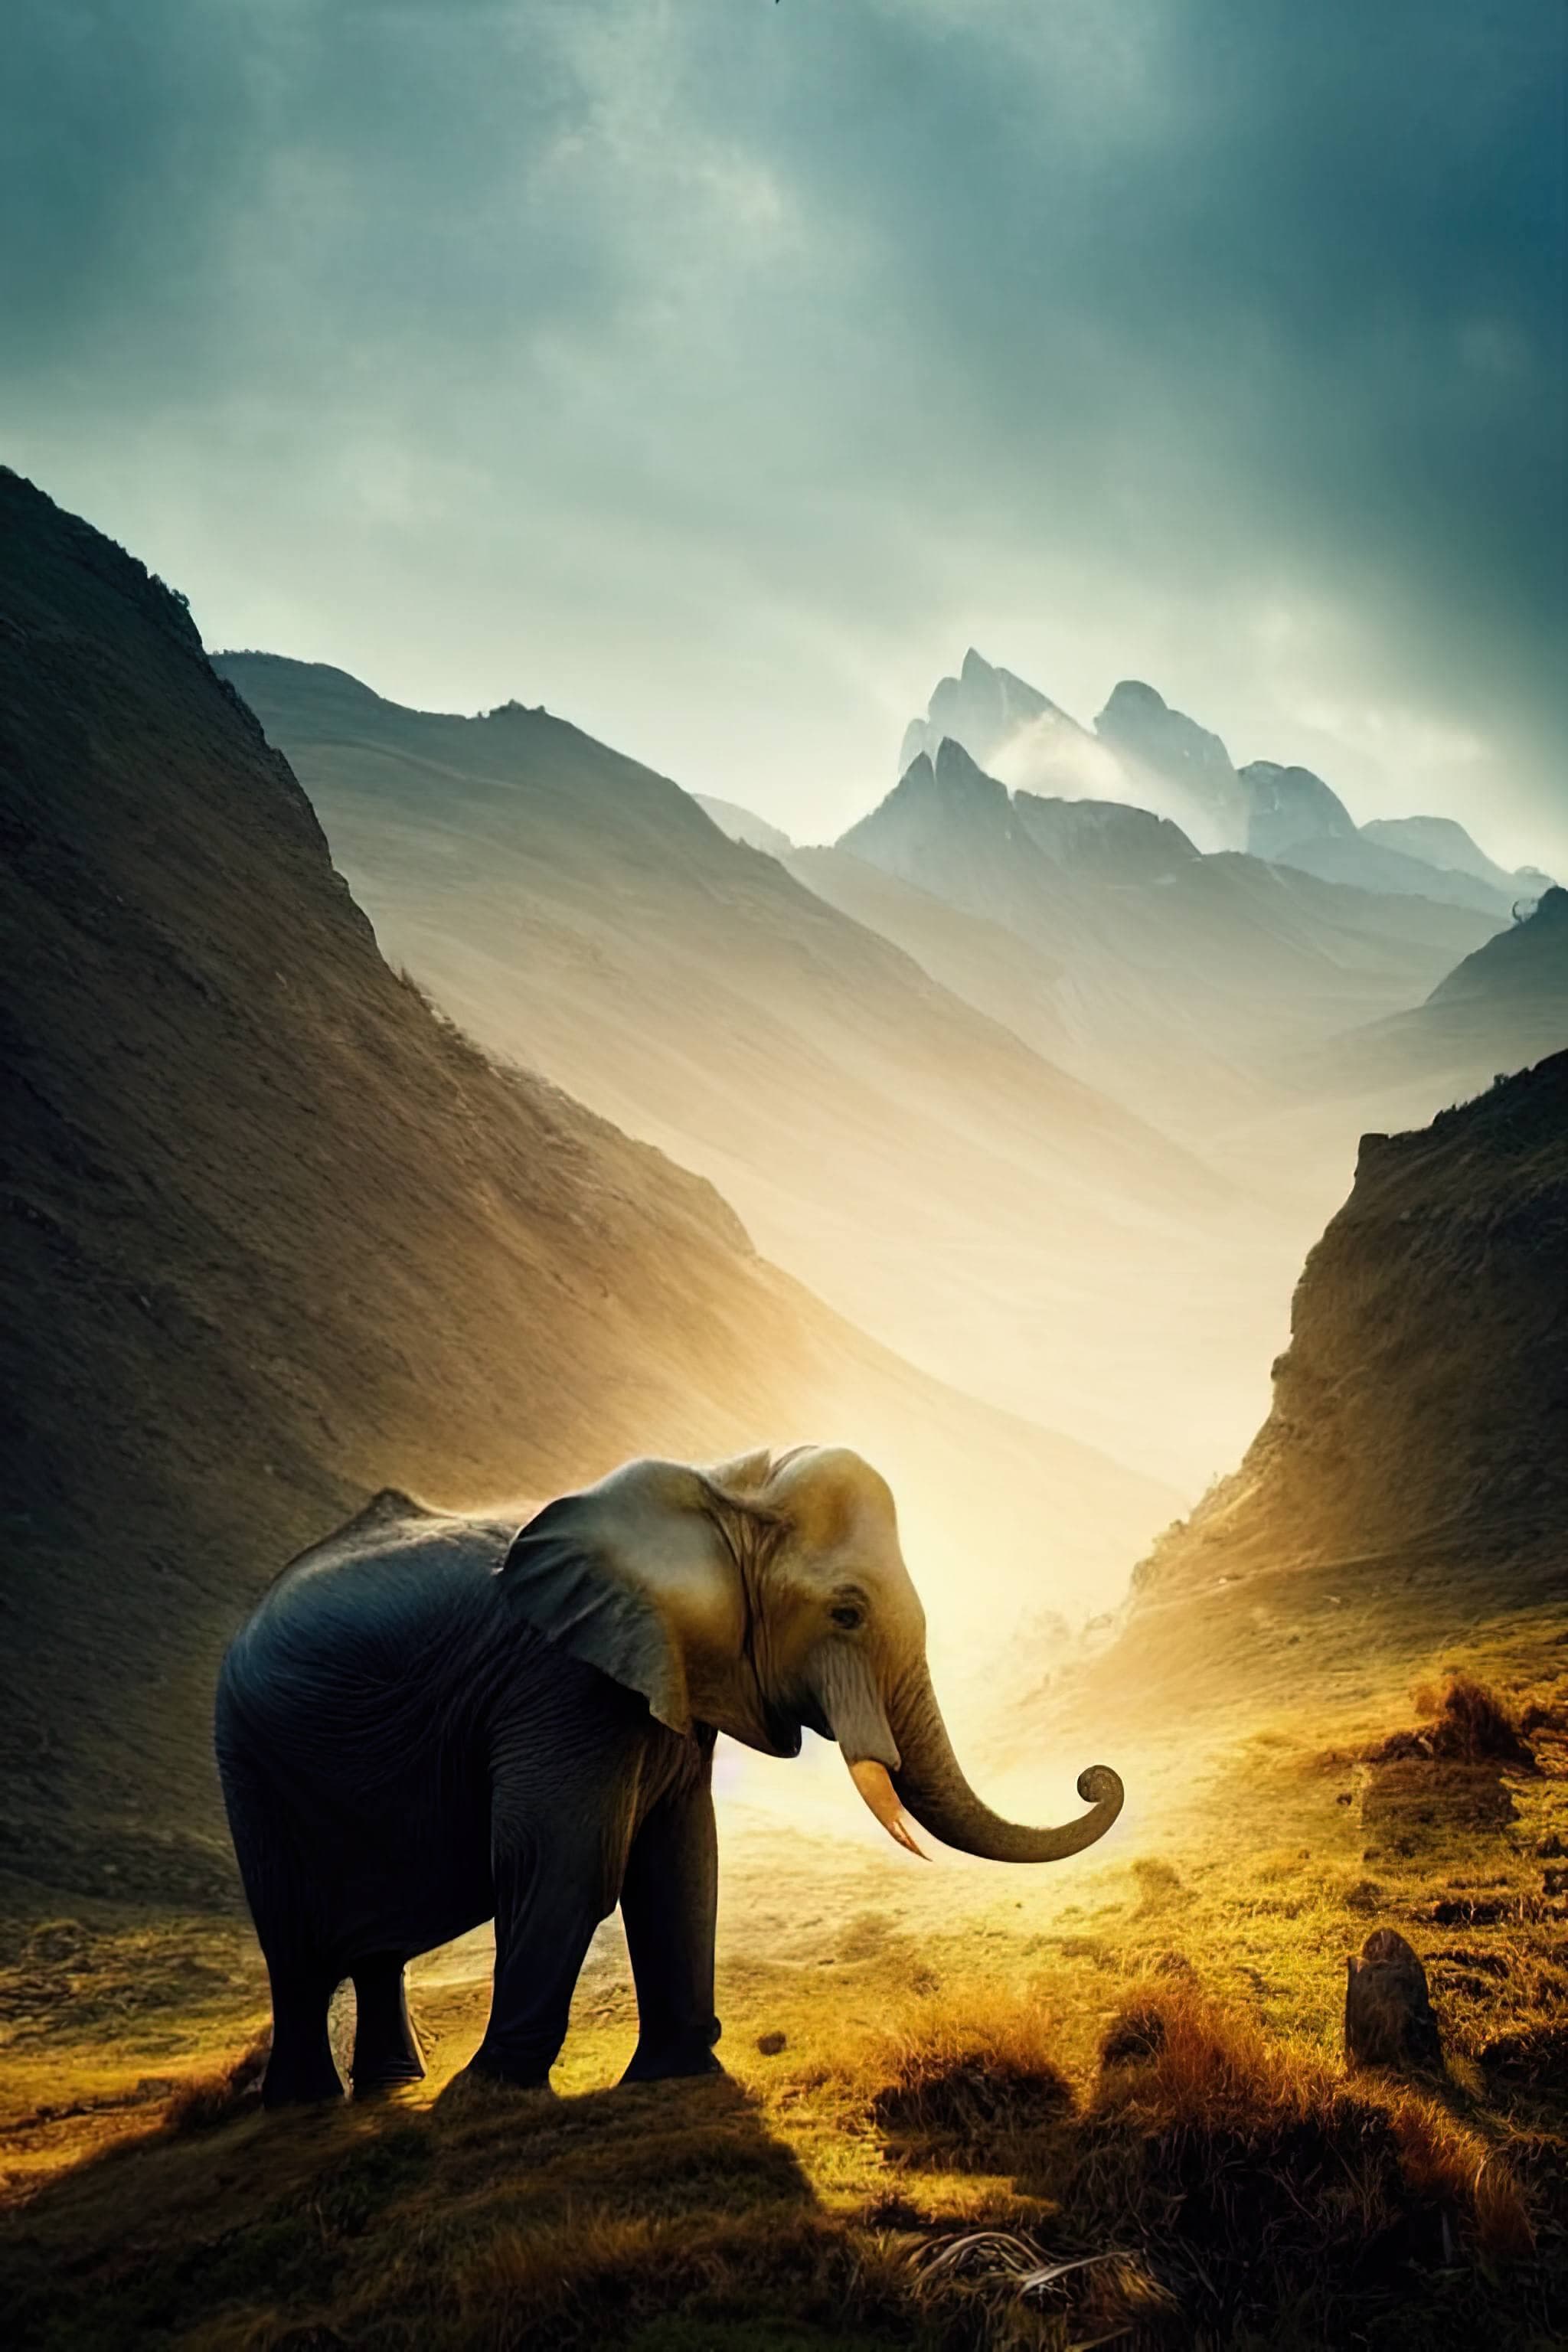 An elephant standing in a field with mountains behind it - Elephant